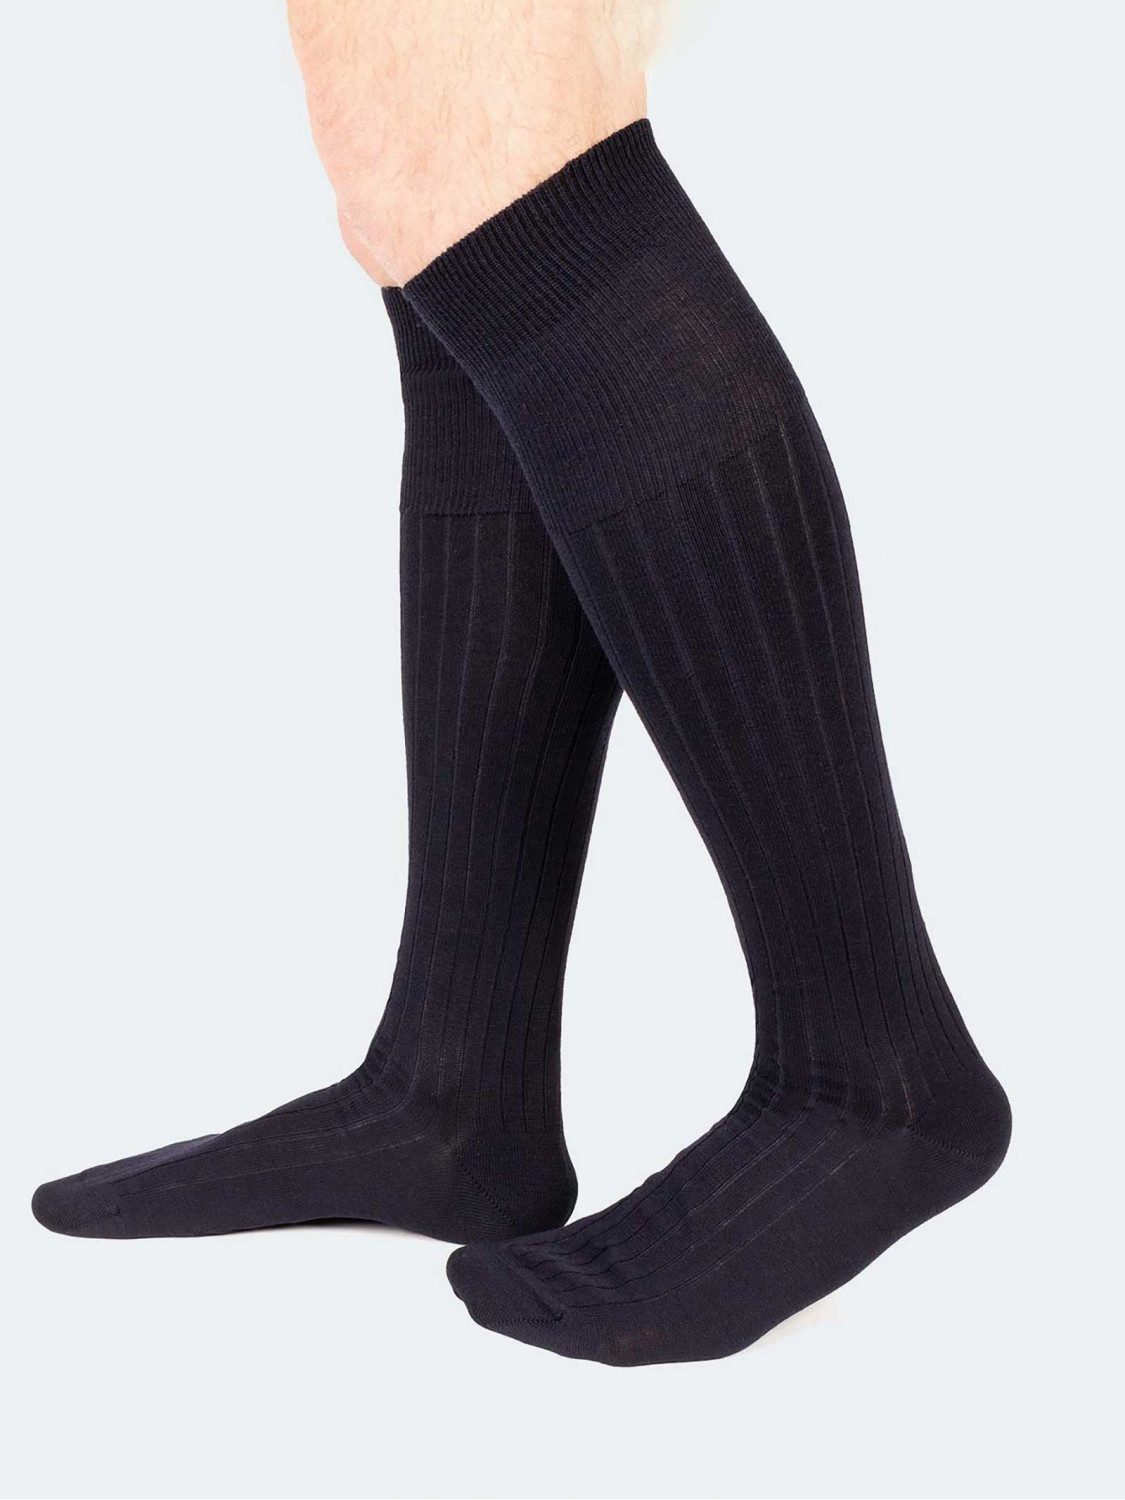 Stretch wool Knee high socks - Made in Italy